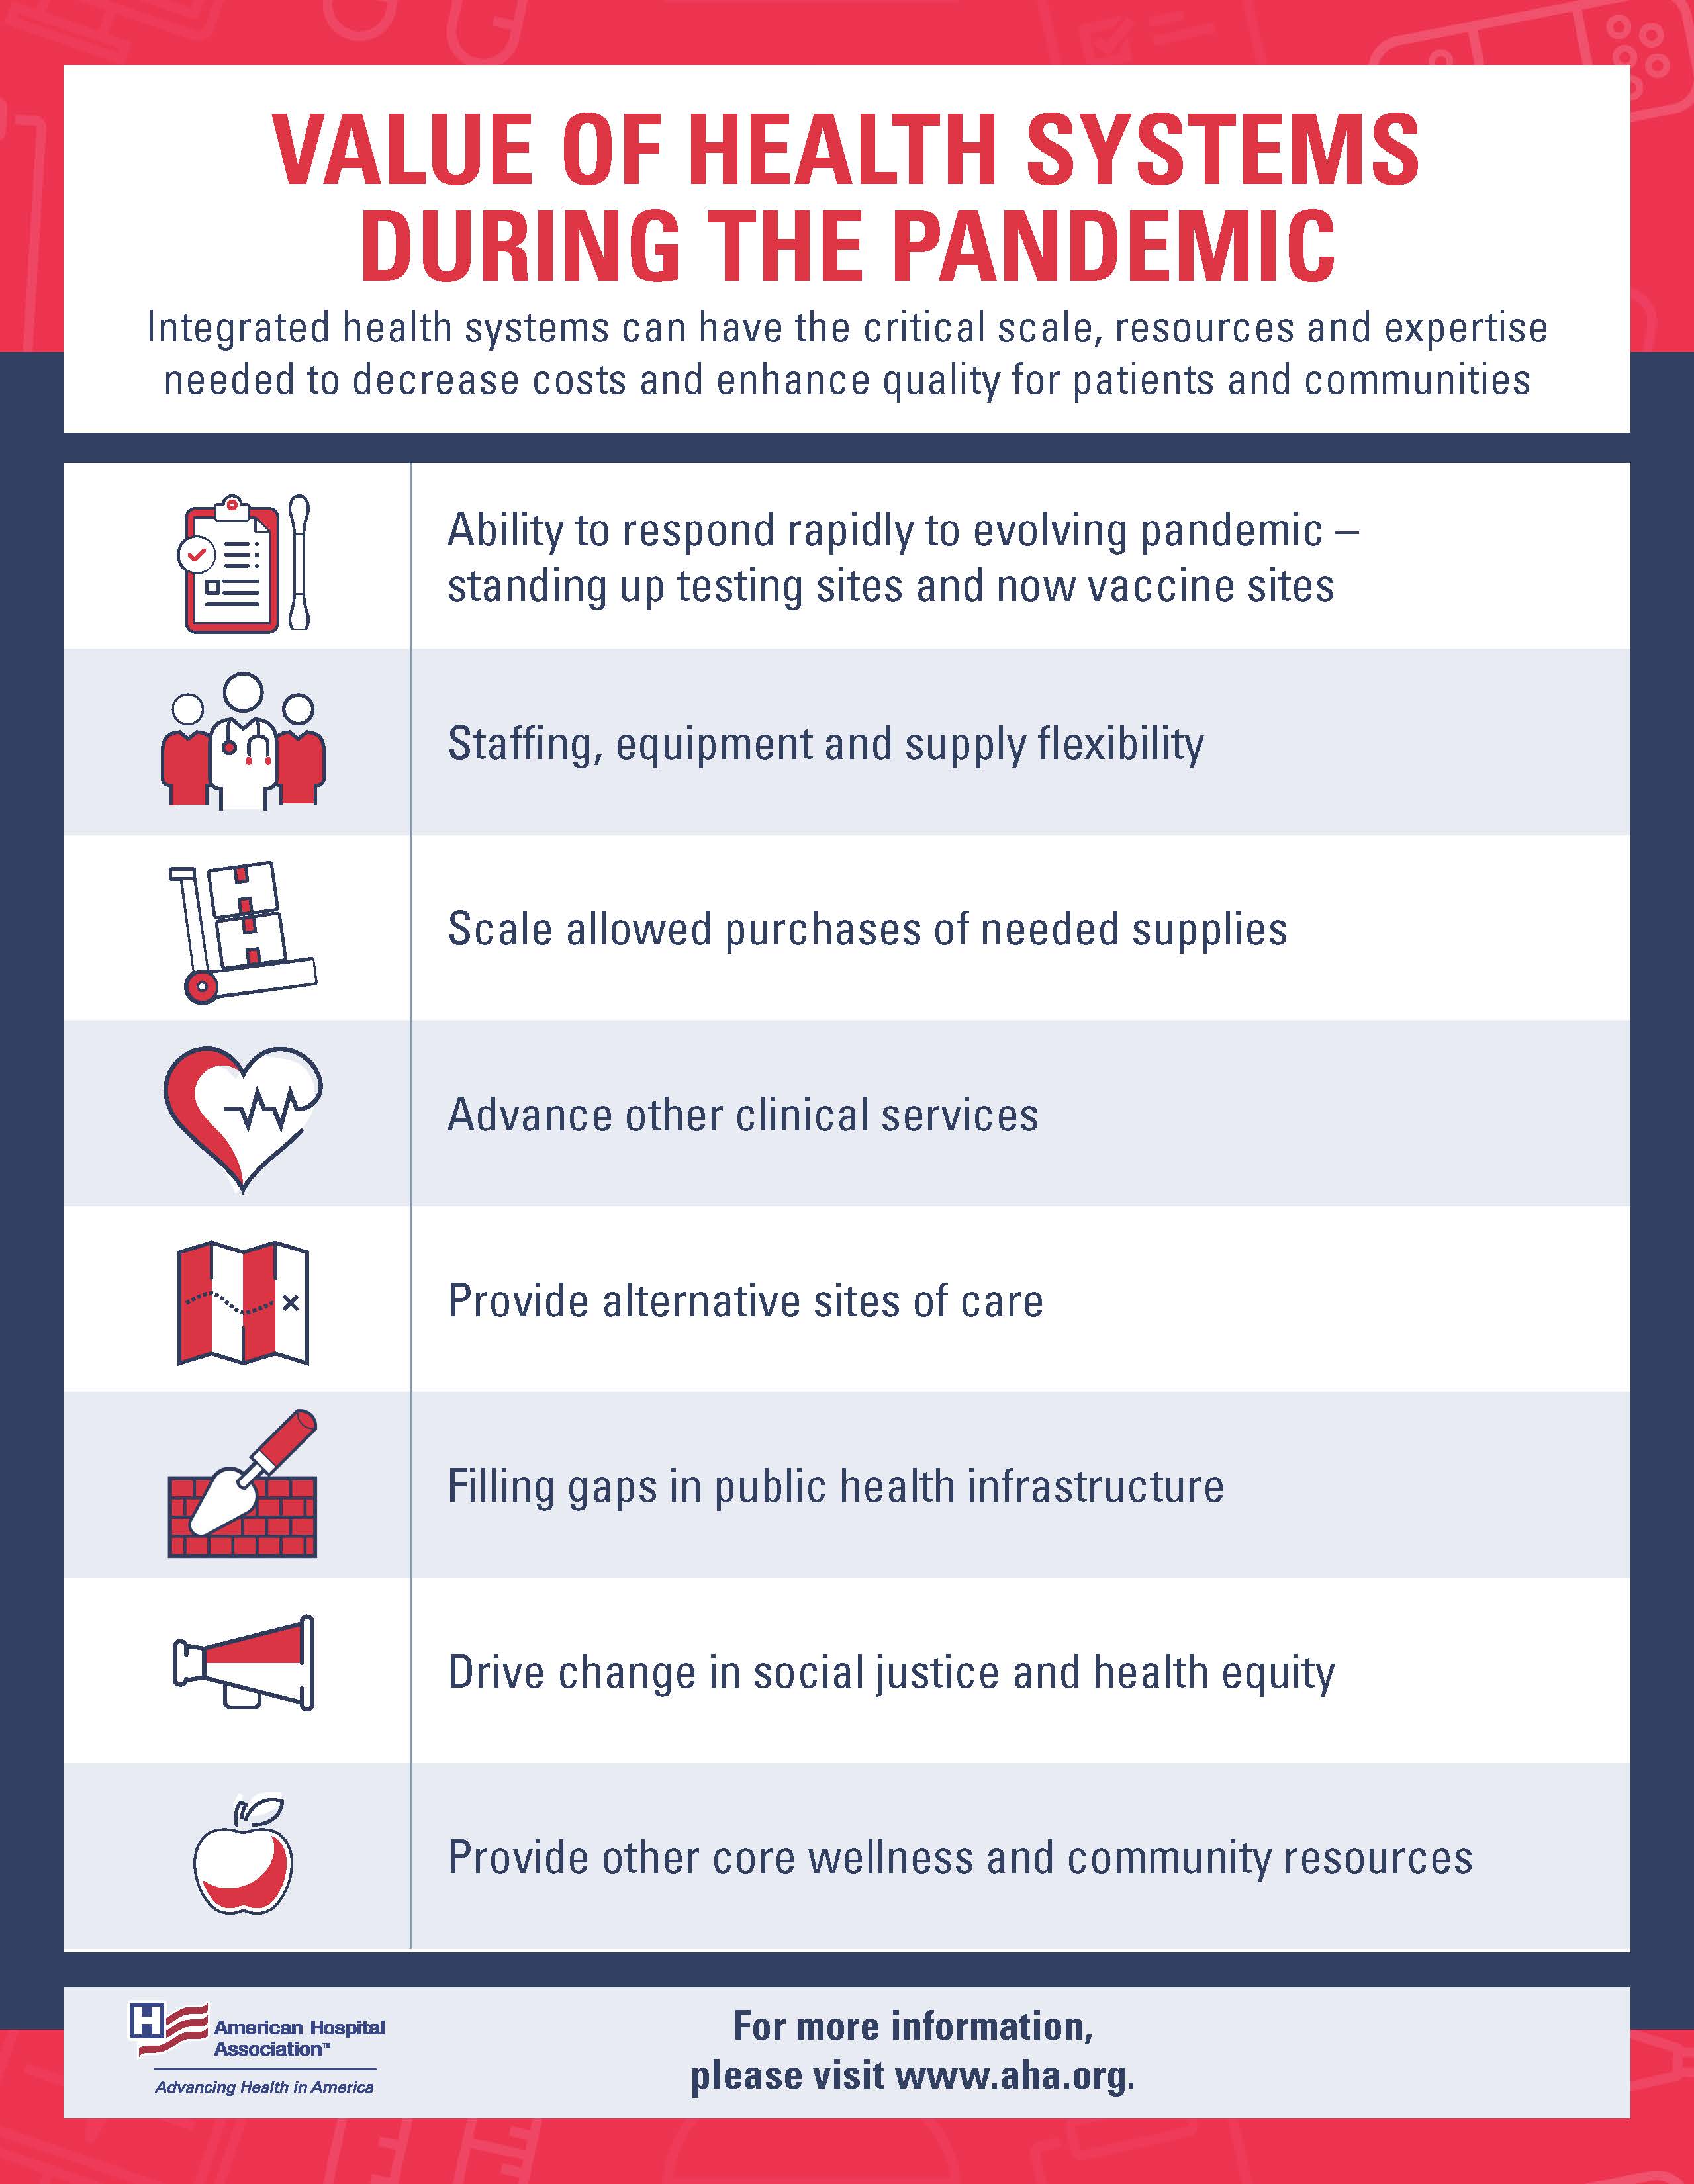 Value of Health Systems during the Pandemic infographic. Integrated health systems have the critical scale, resources and expertise needed to decrease costs and enhance quality for patients and communities.